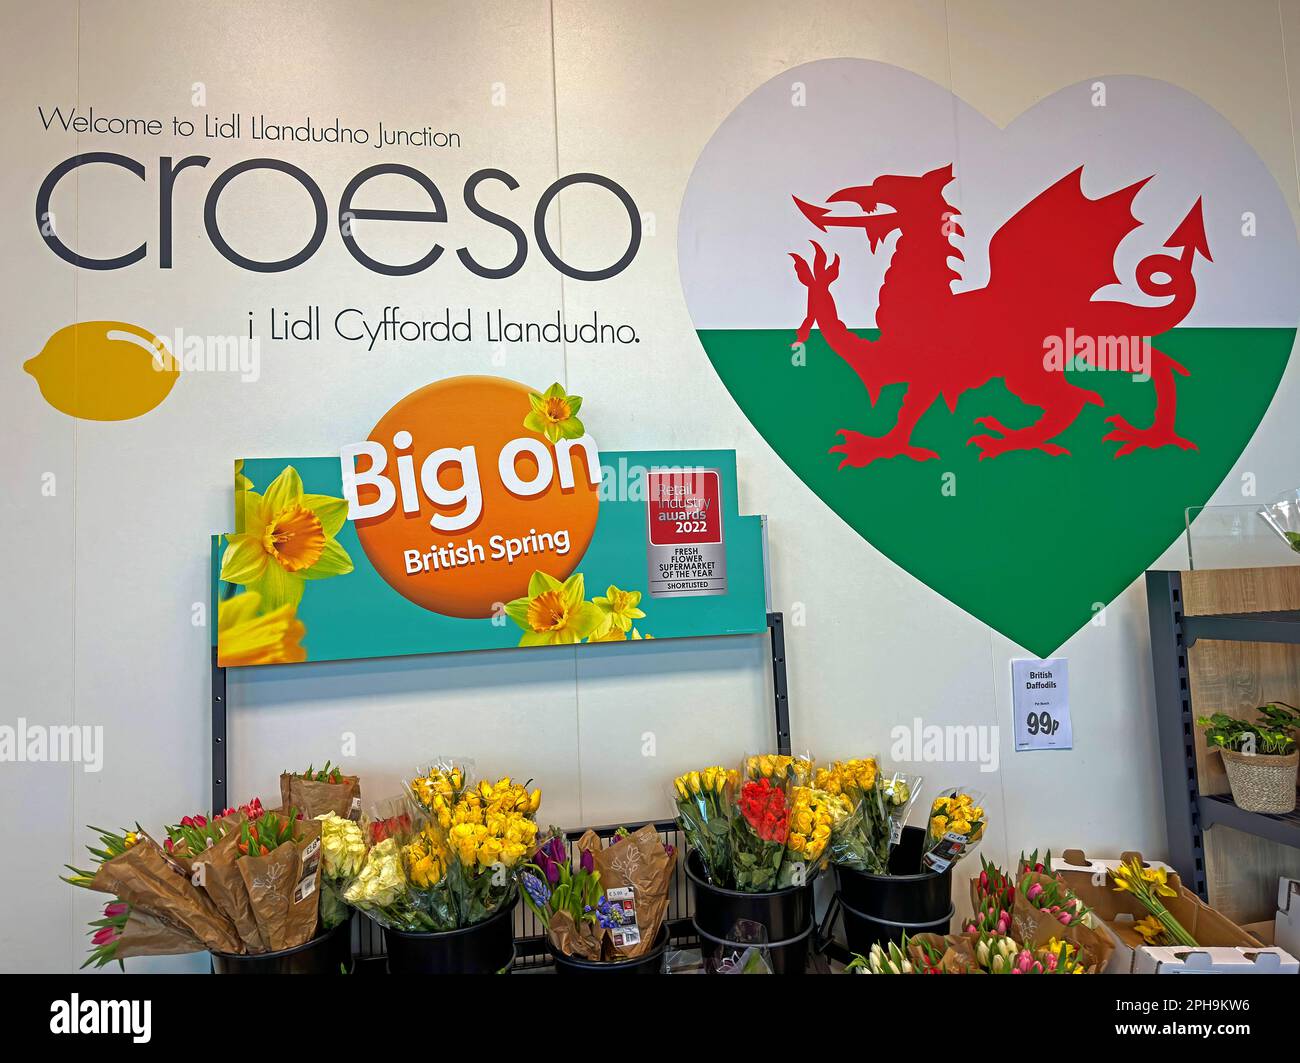 Welcome to LIDL supermarket in Llandudno Junction - i Cyffordd Llandudno, a heart with a Welsh red dragon, flowers , daffodils Big on British Spring Stock Photo